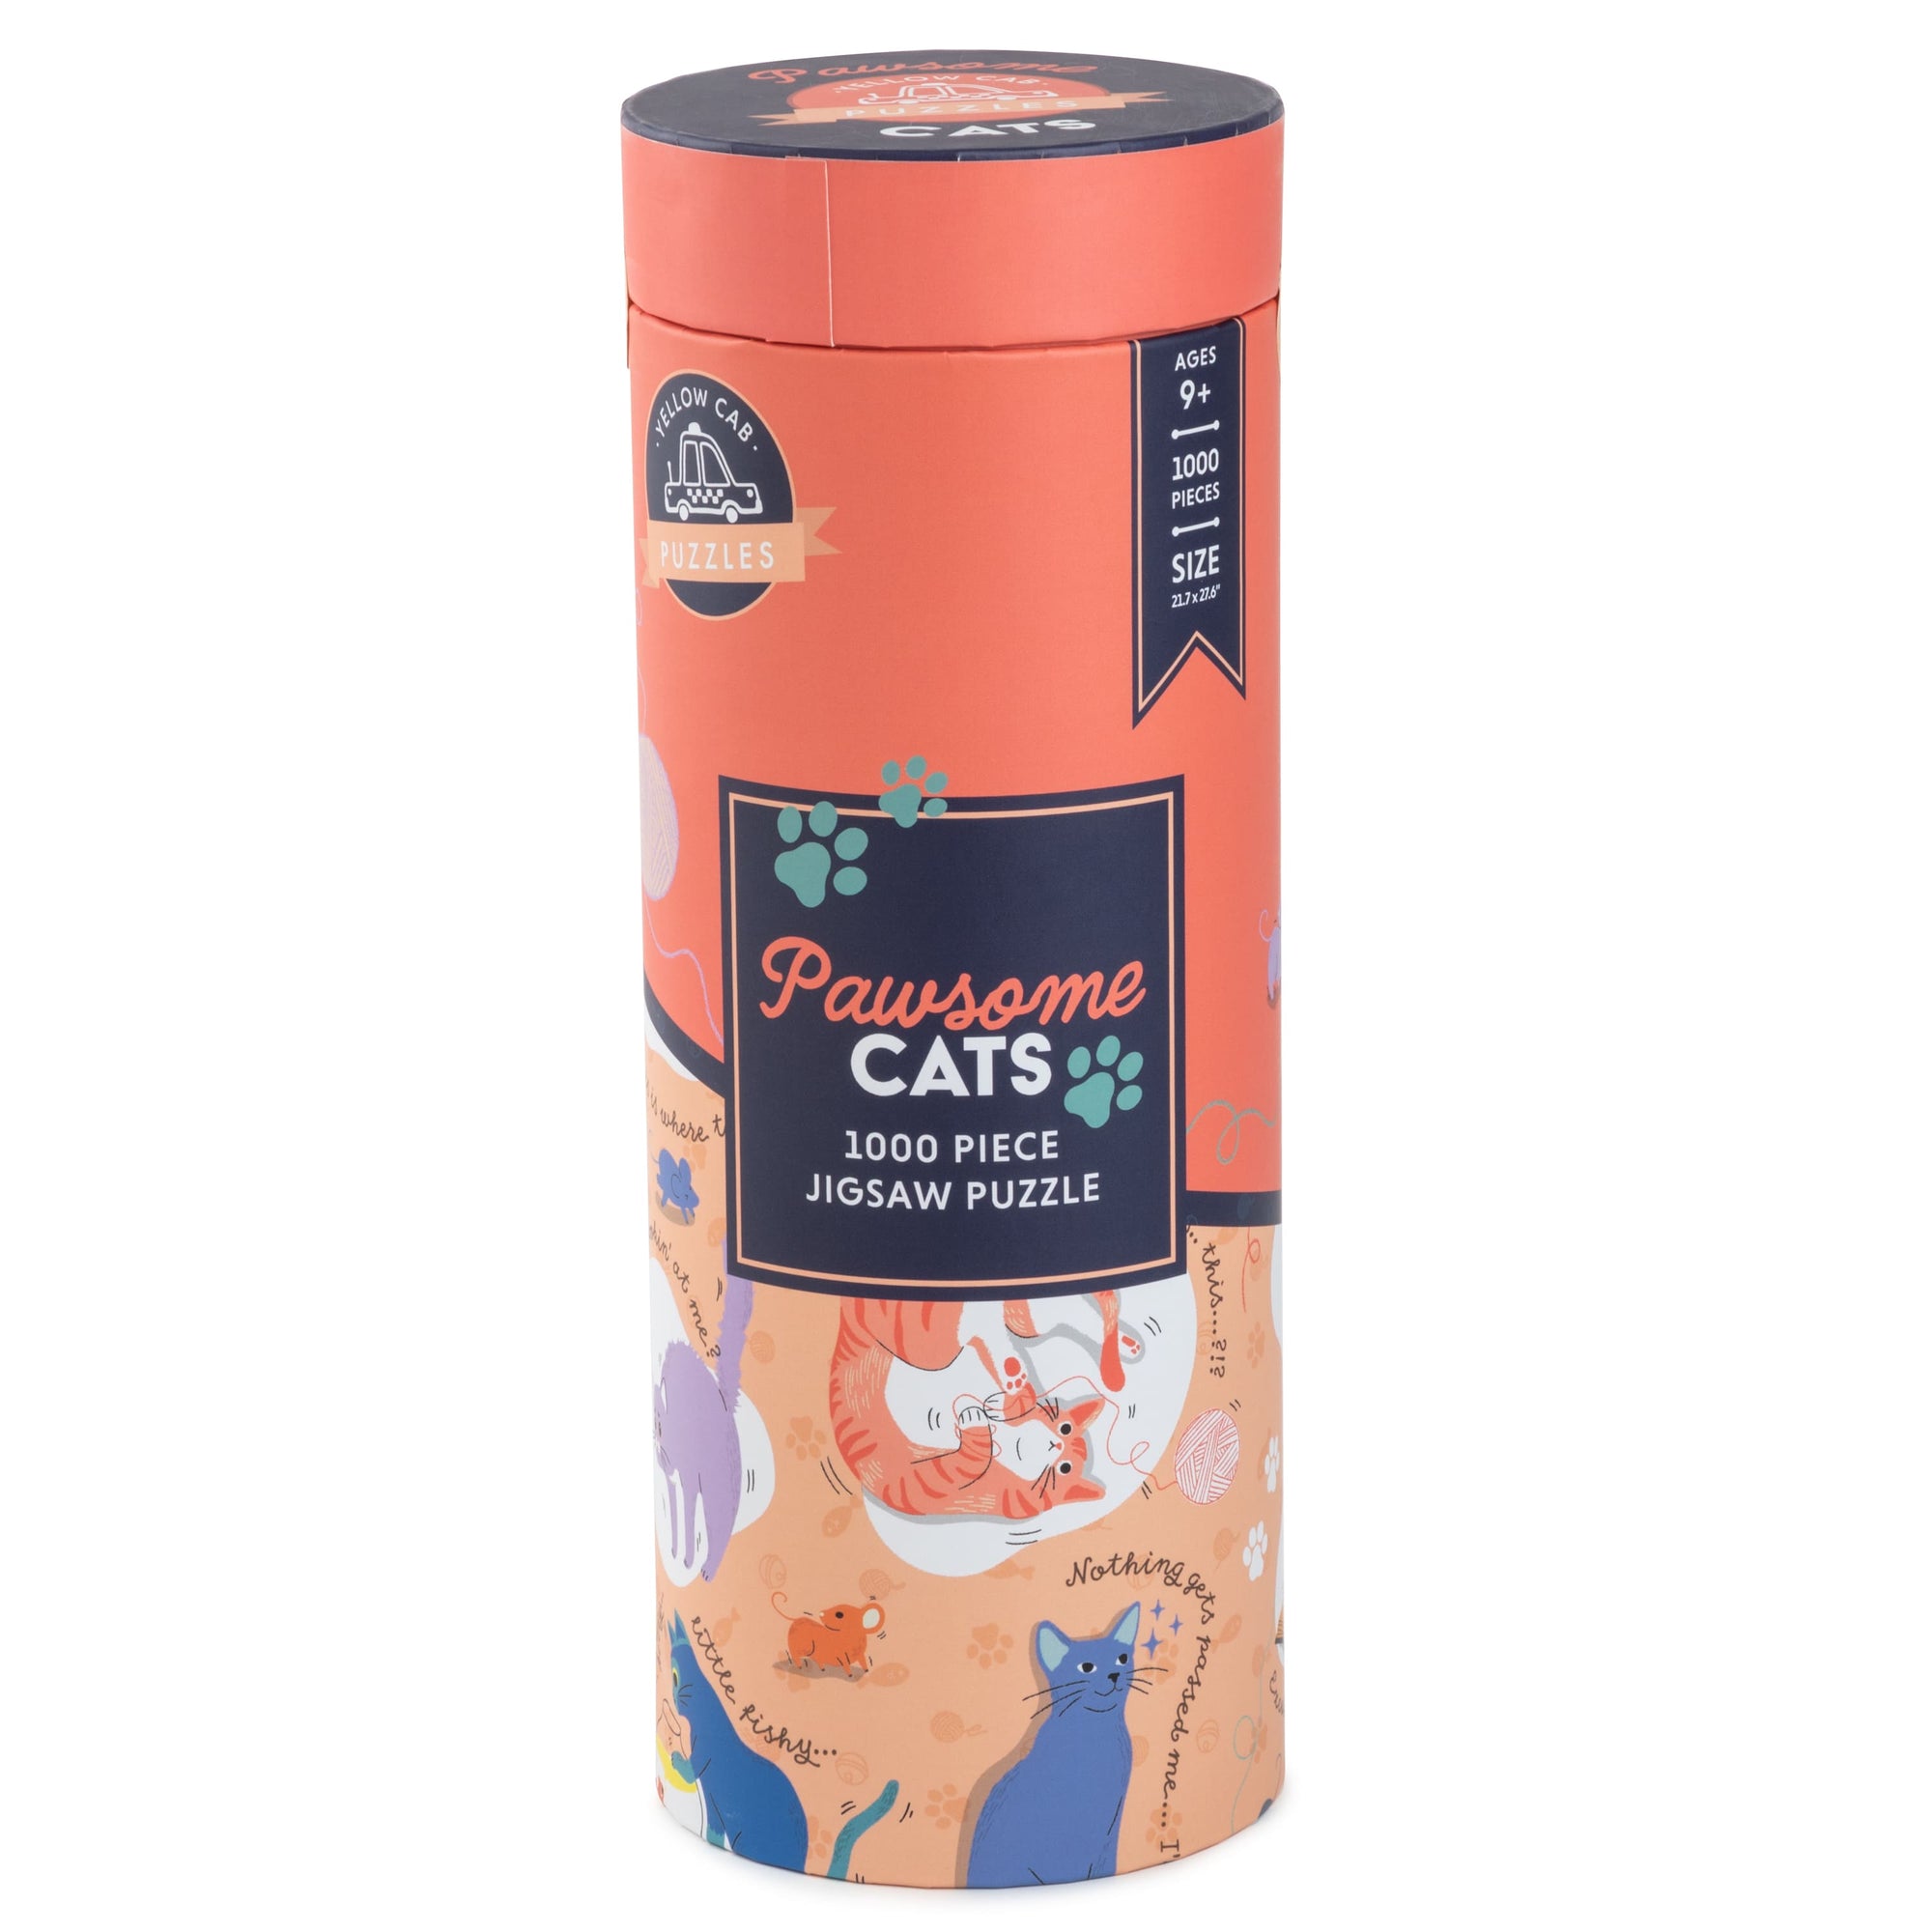 Pawsome Cats Jigsaw Puzzle